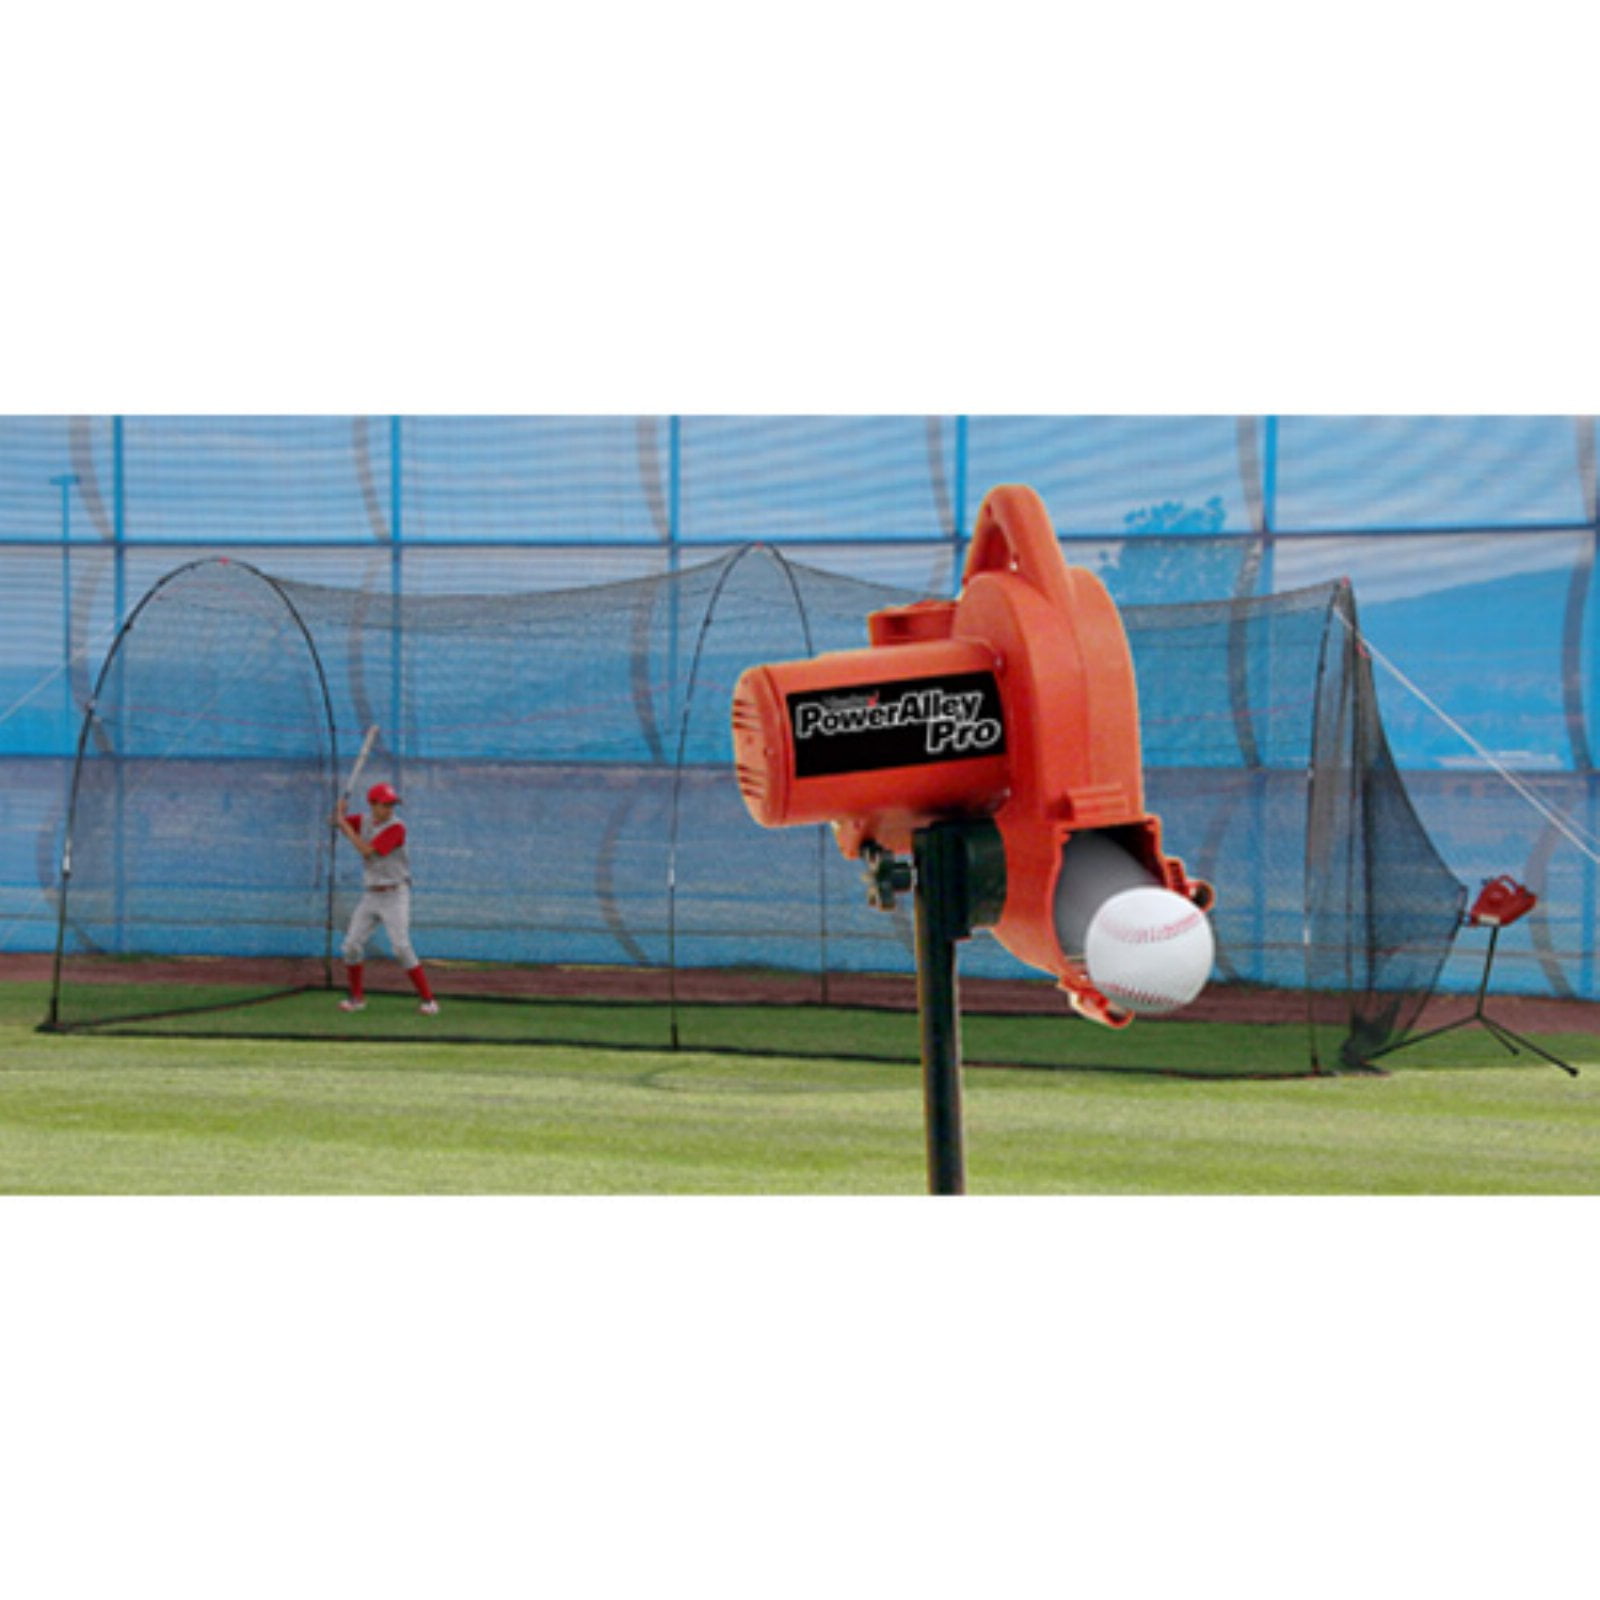 Heater Sports Heater Real 12 Inch Softball Machine Reconditioned 